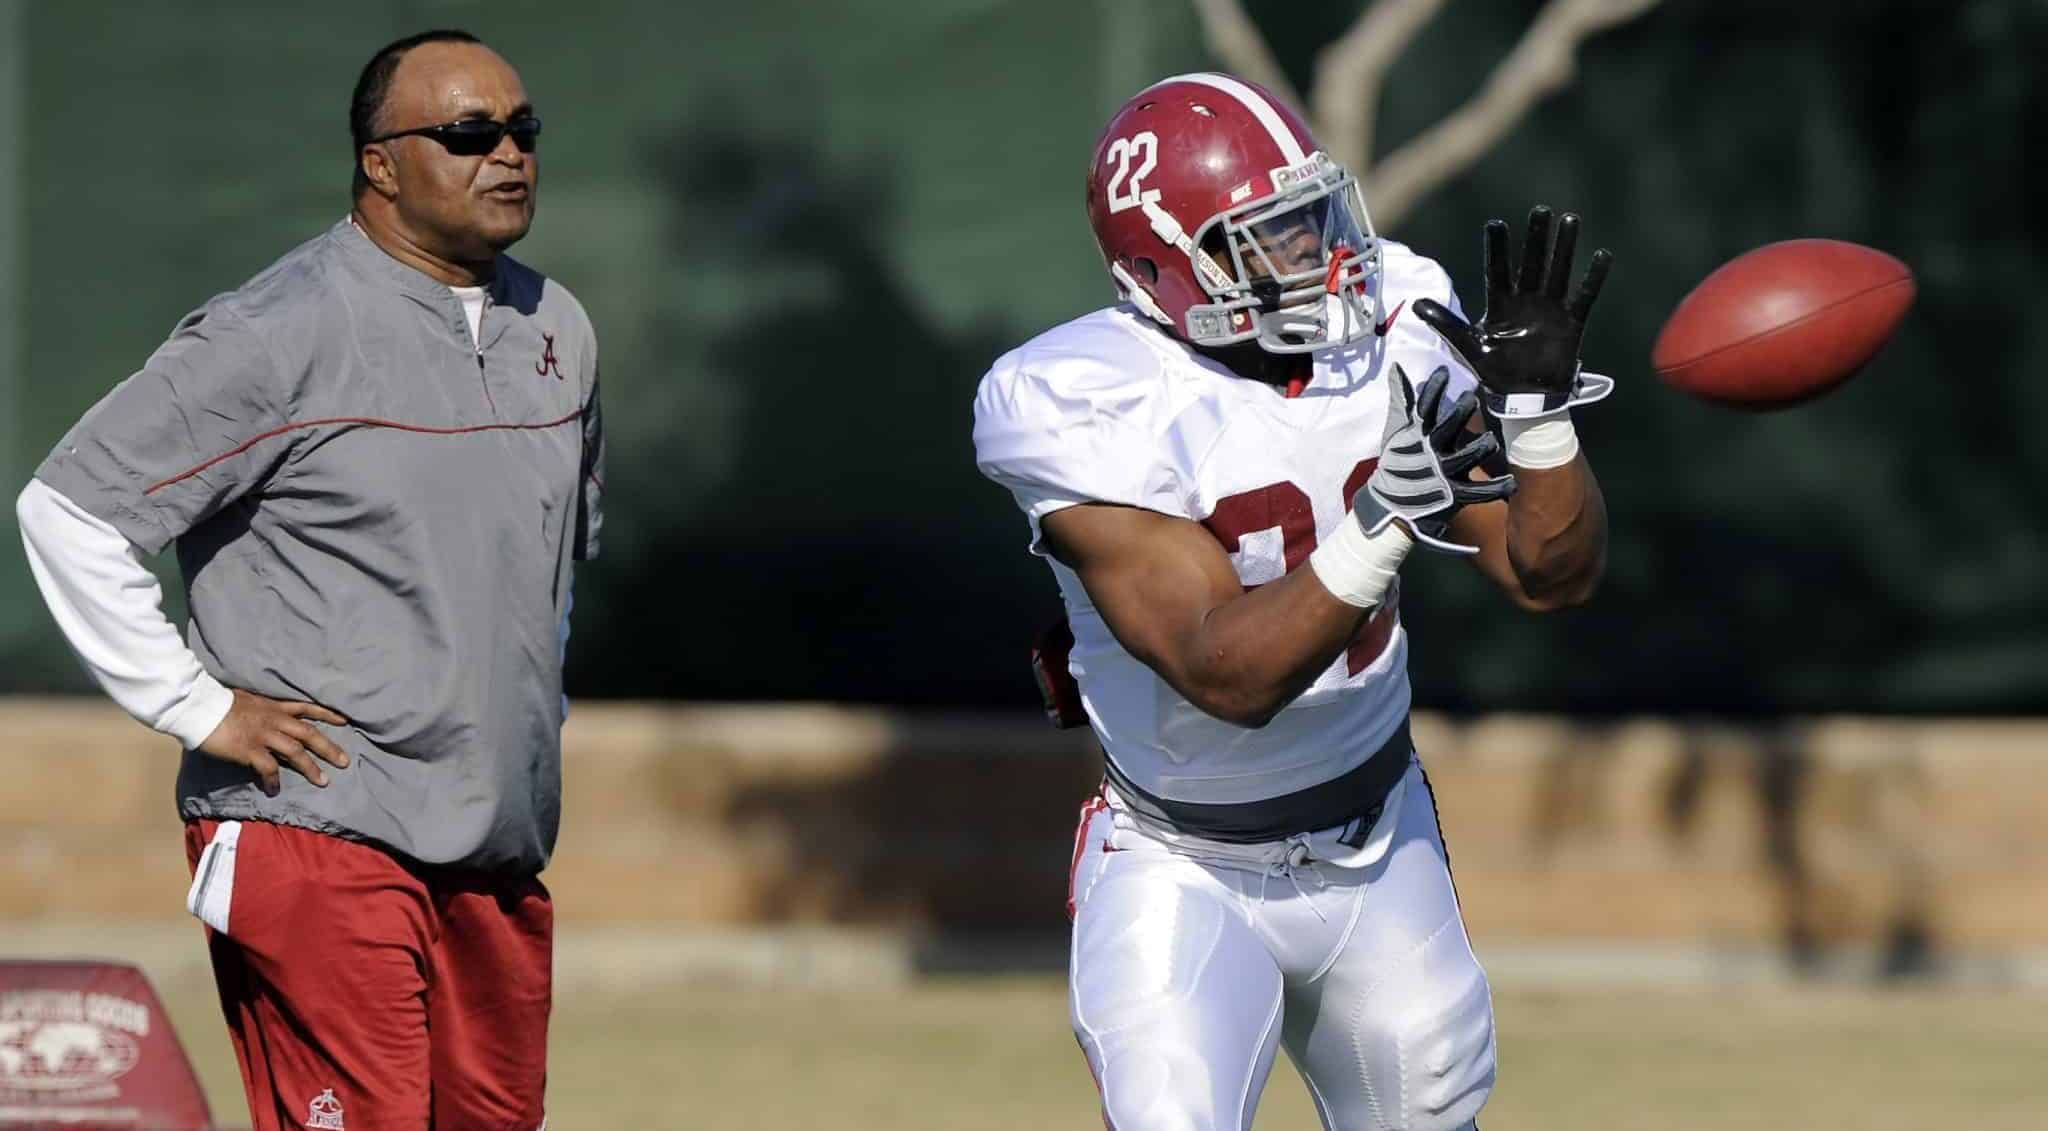 Alabama running back Mark Ingram makes a catch as associate head and running backs coach Burton Burns looks on during practice, Saturday, Jan. 2, 2010, in Costa Mesa, Calif., in preparation for their BCS Championship NCAA college football game against Texas. The game is scheduled for Thursday, Jan. 7.